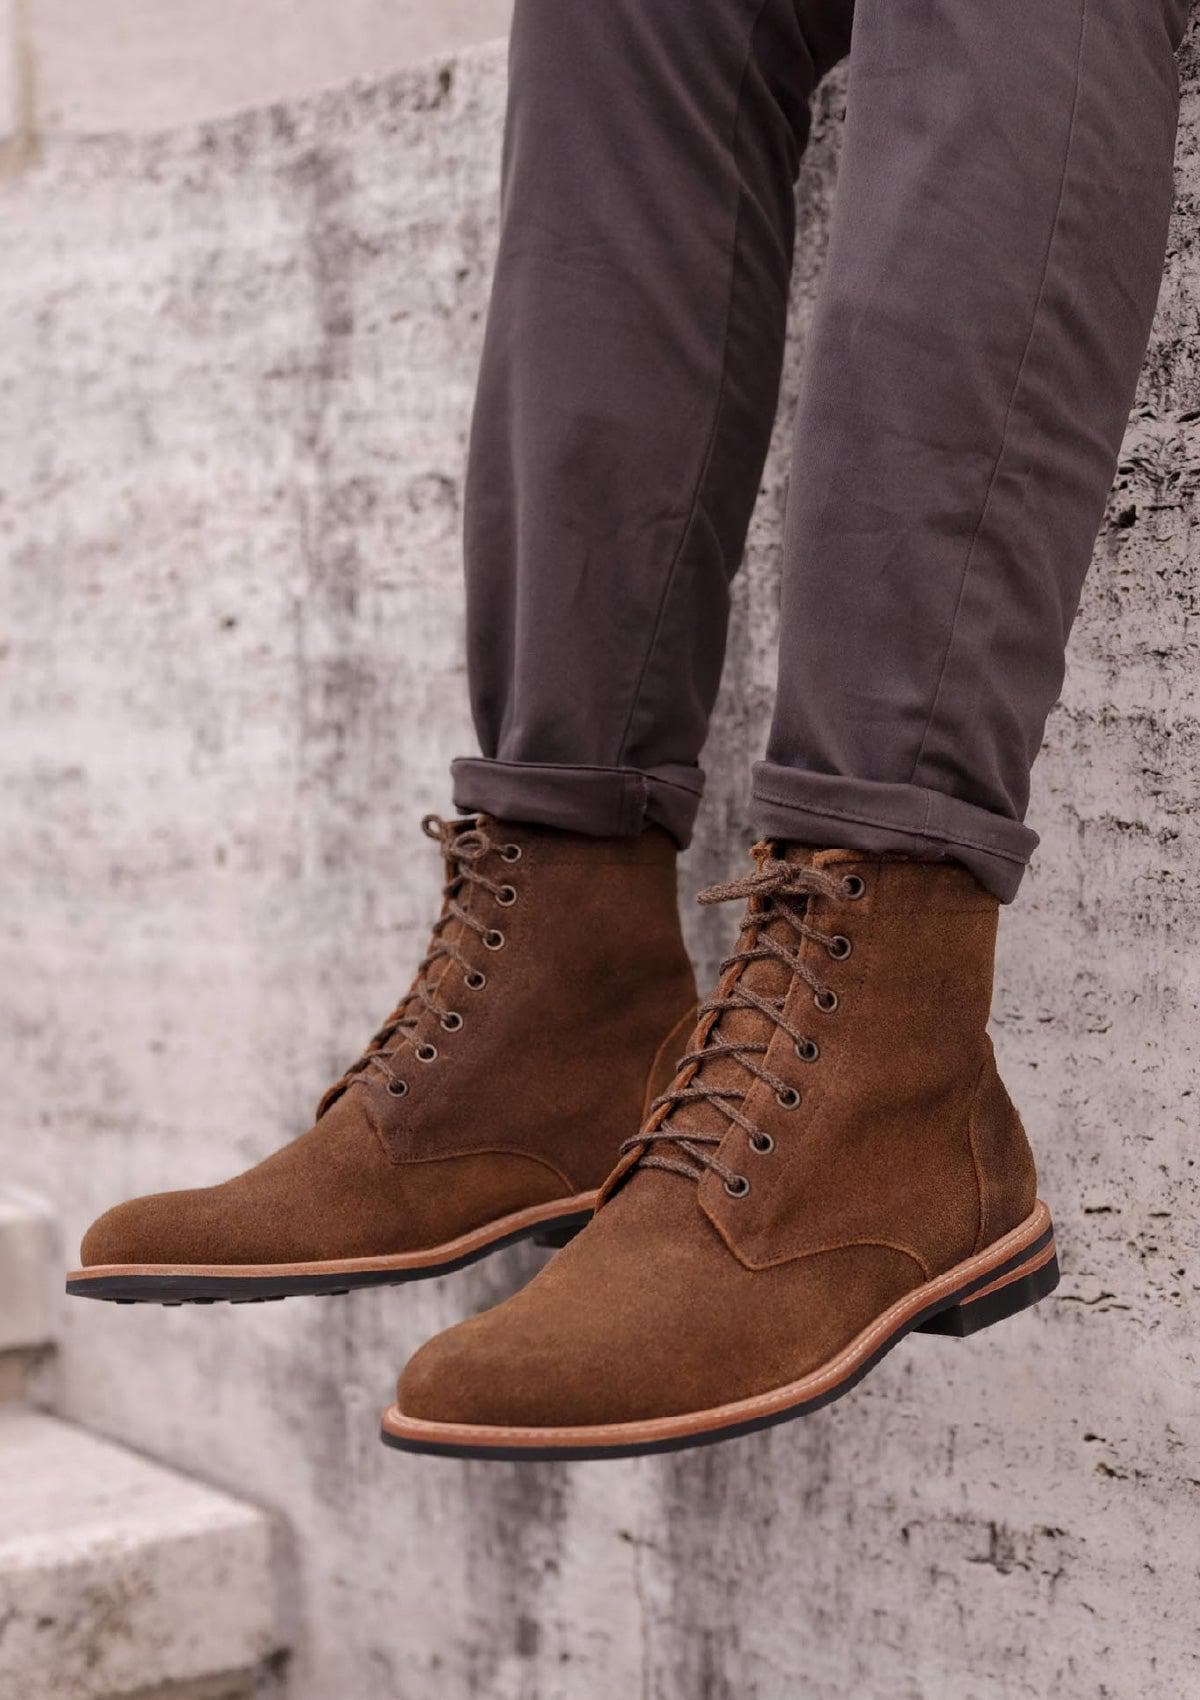 All-Weather Andres Boots - Waxed Brown